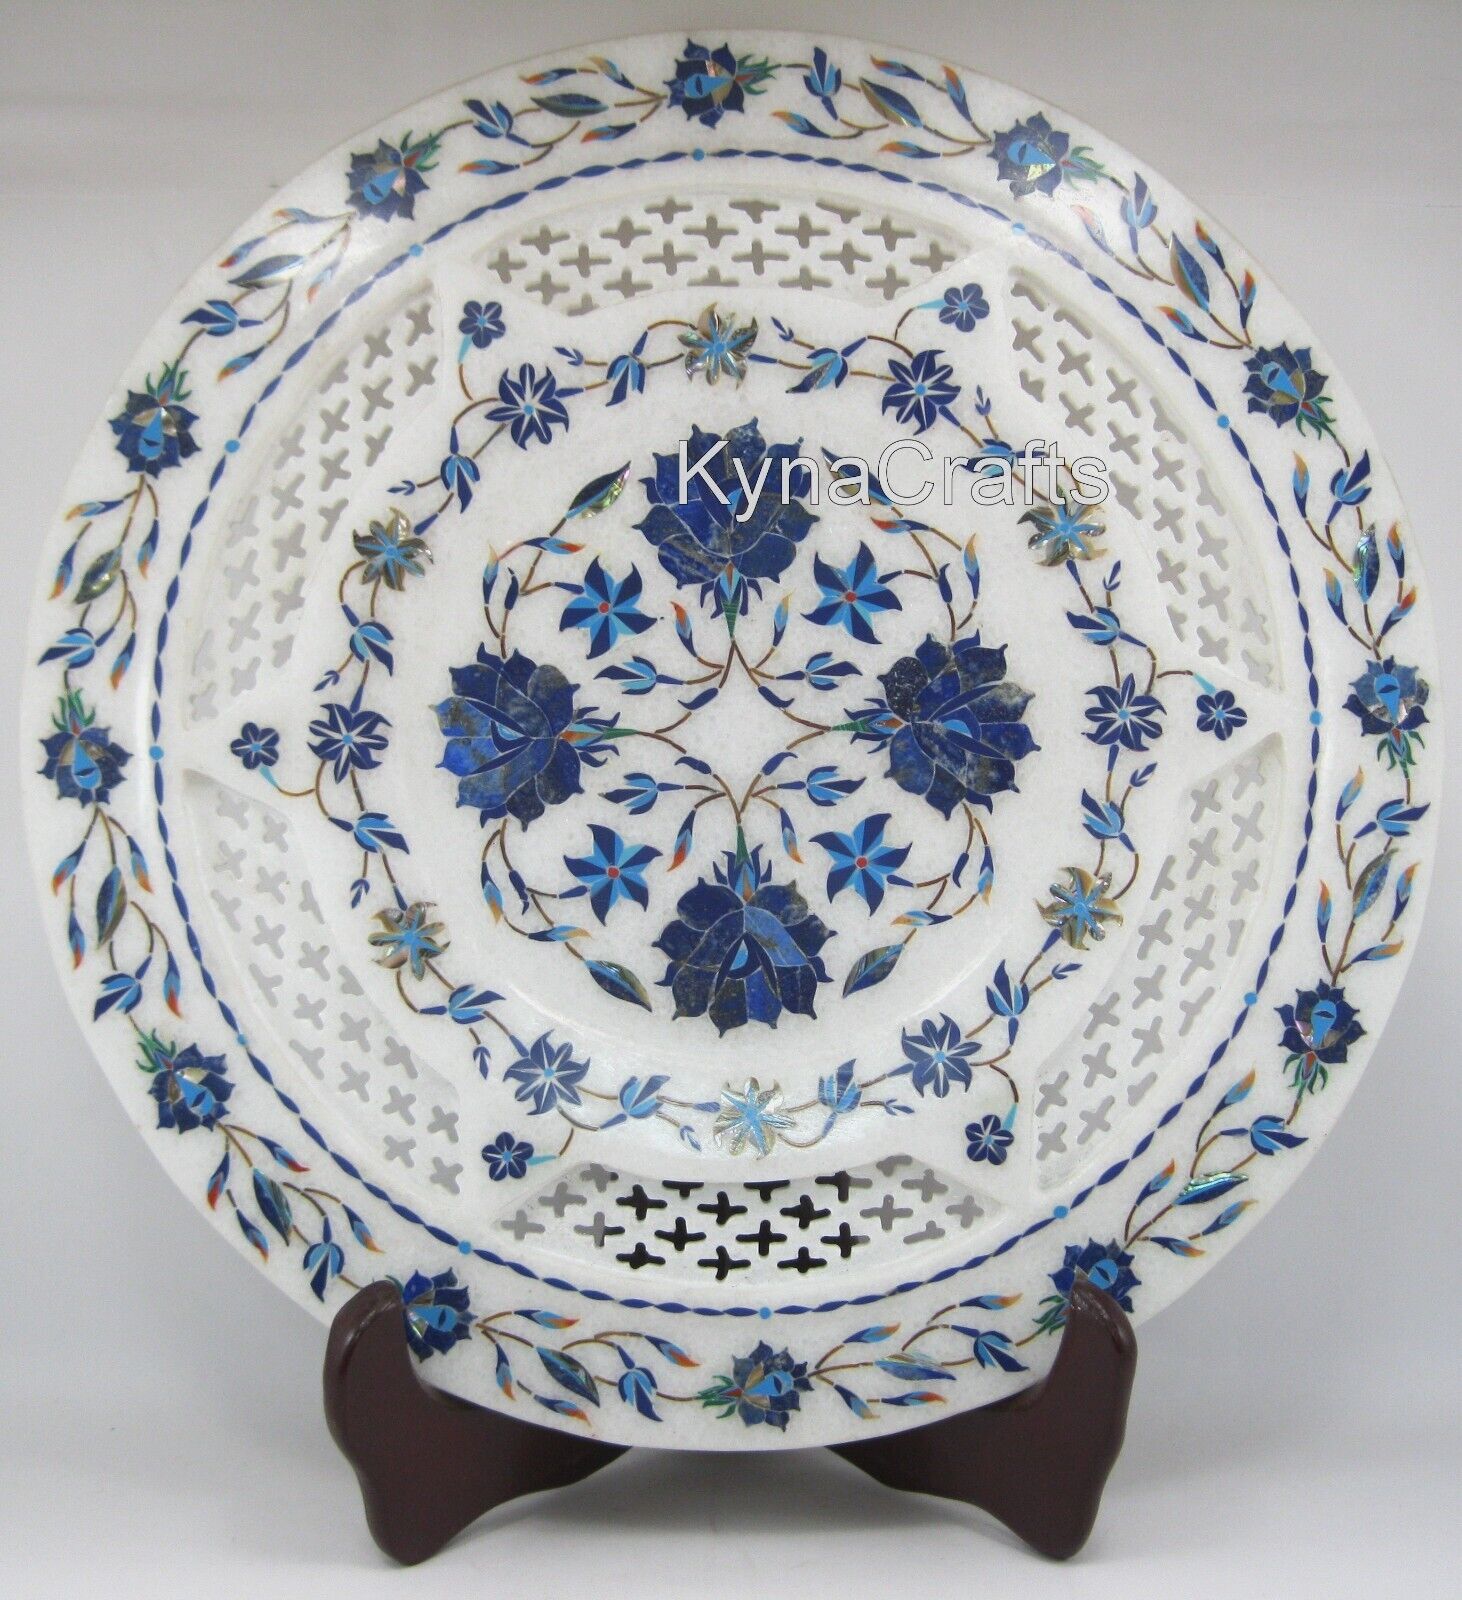 12 Inches Intricate Work Decorative Plate White Marble Placemet with Luxury Look